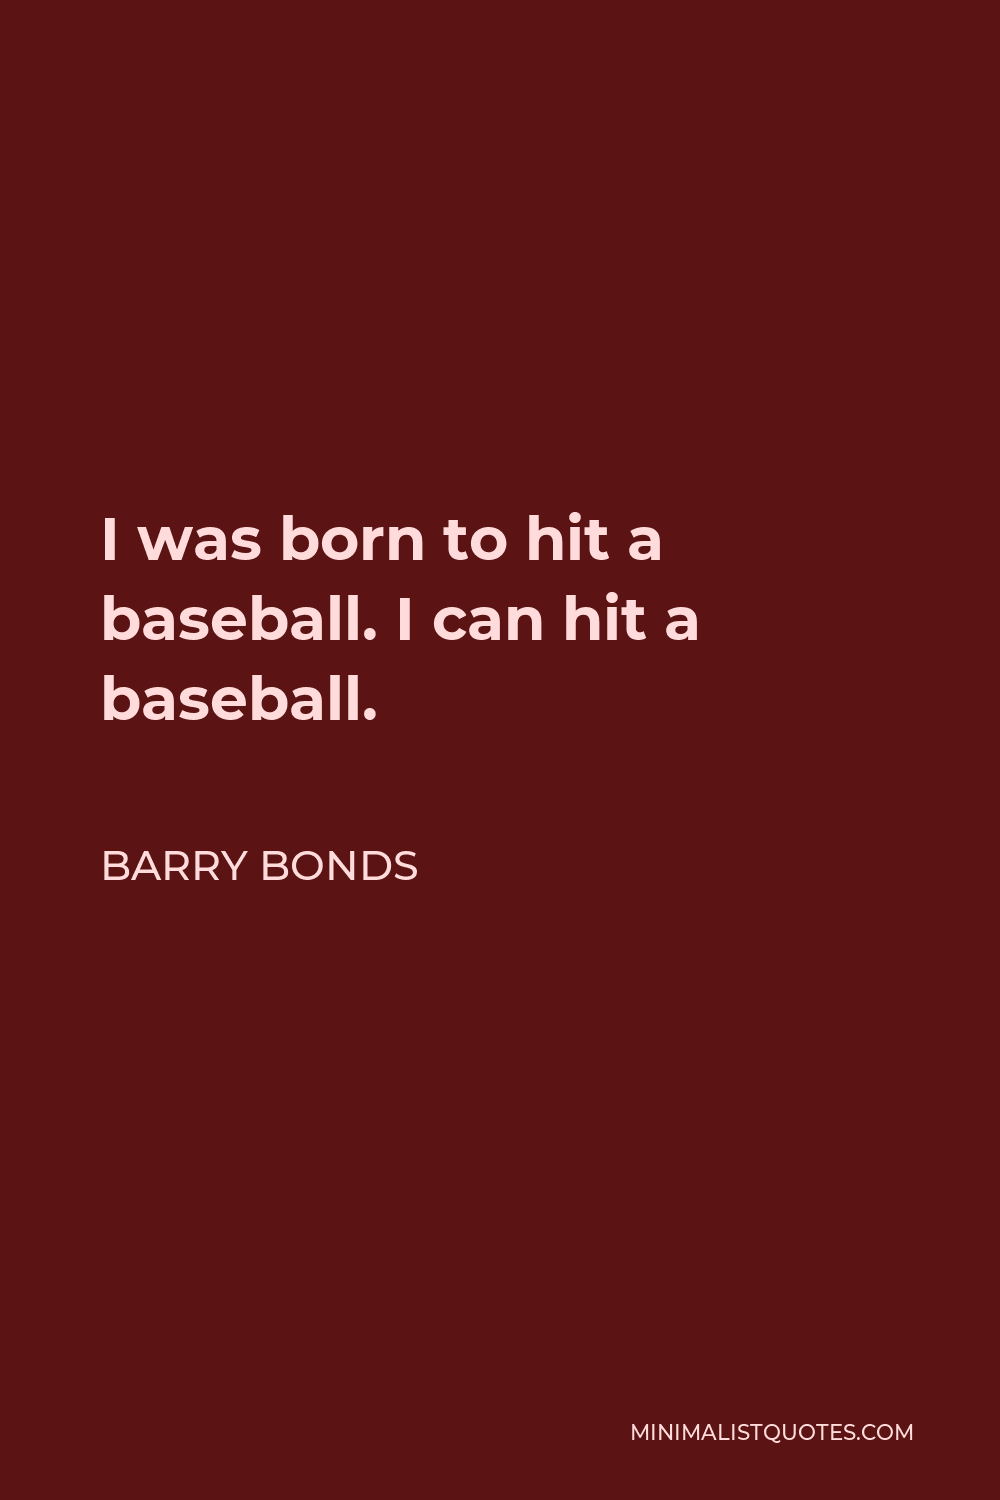 Barry Bonds Quote - I was born to hit a baseball. I can hit a baseball.